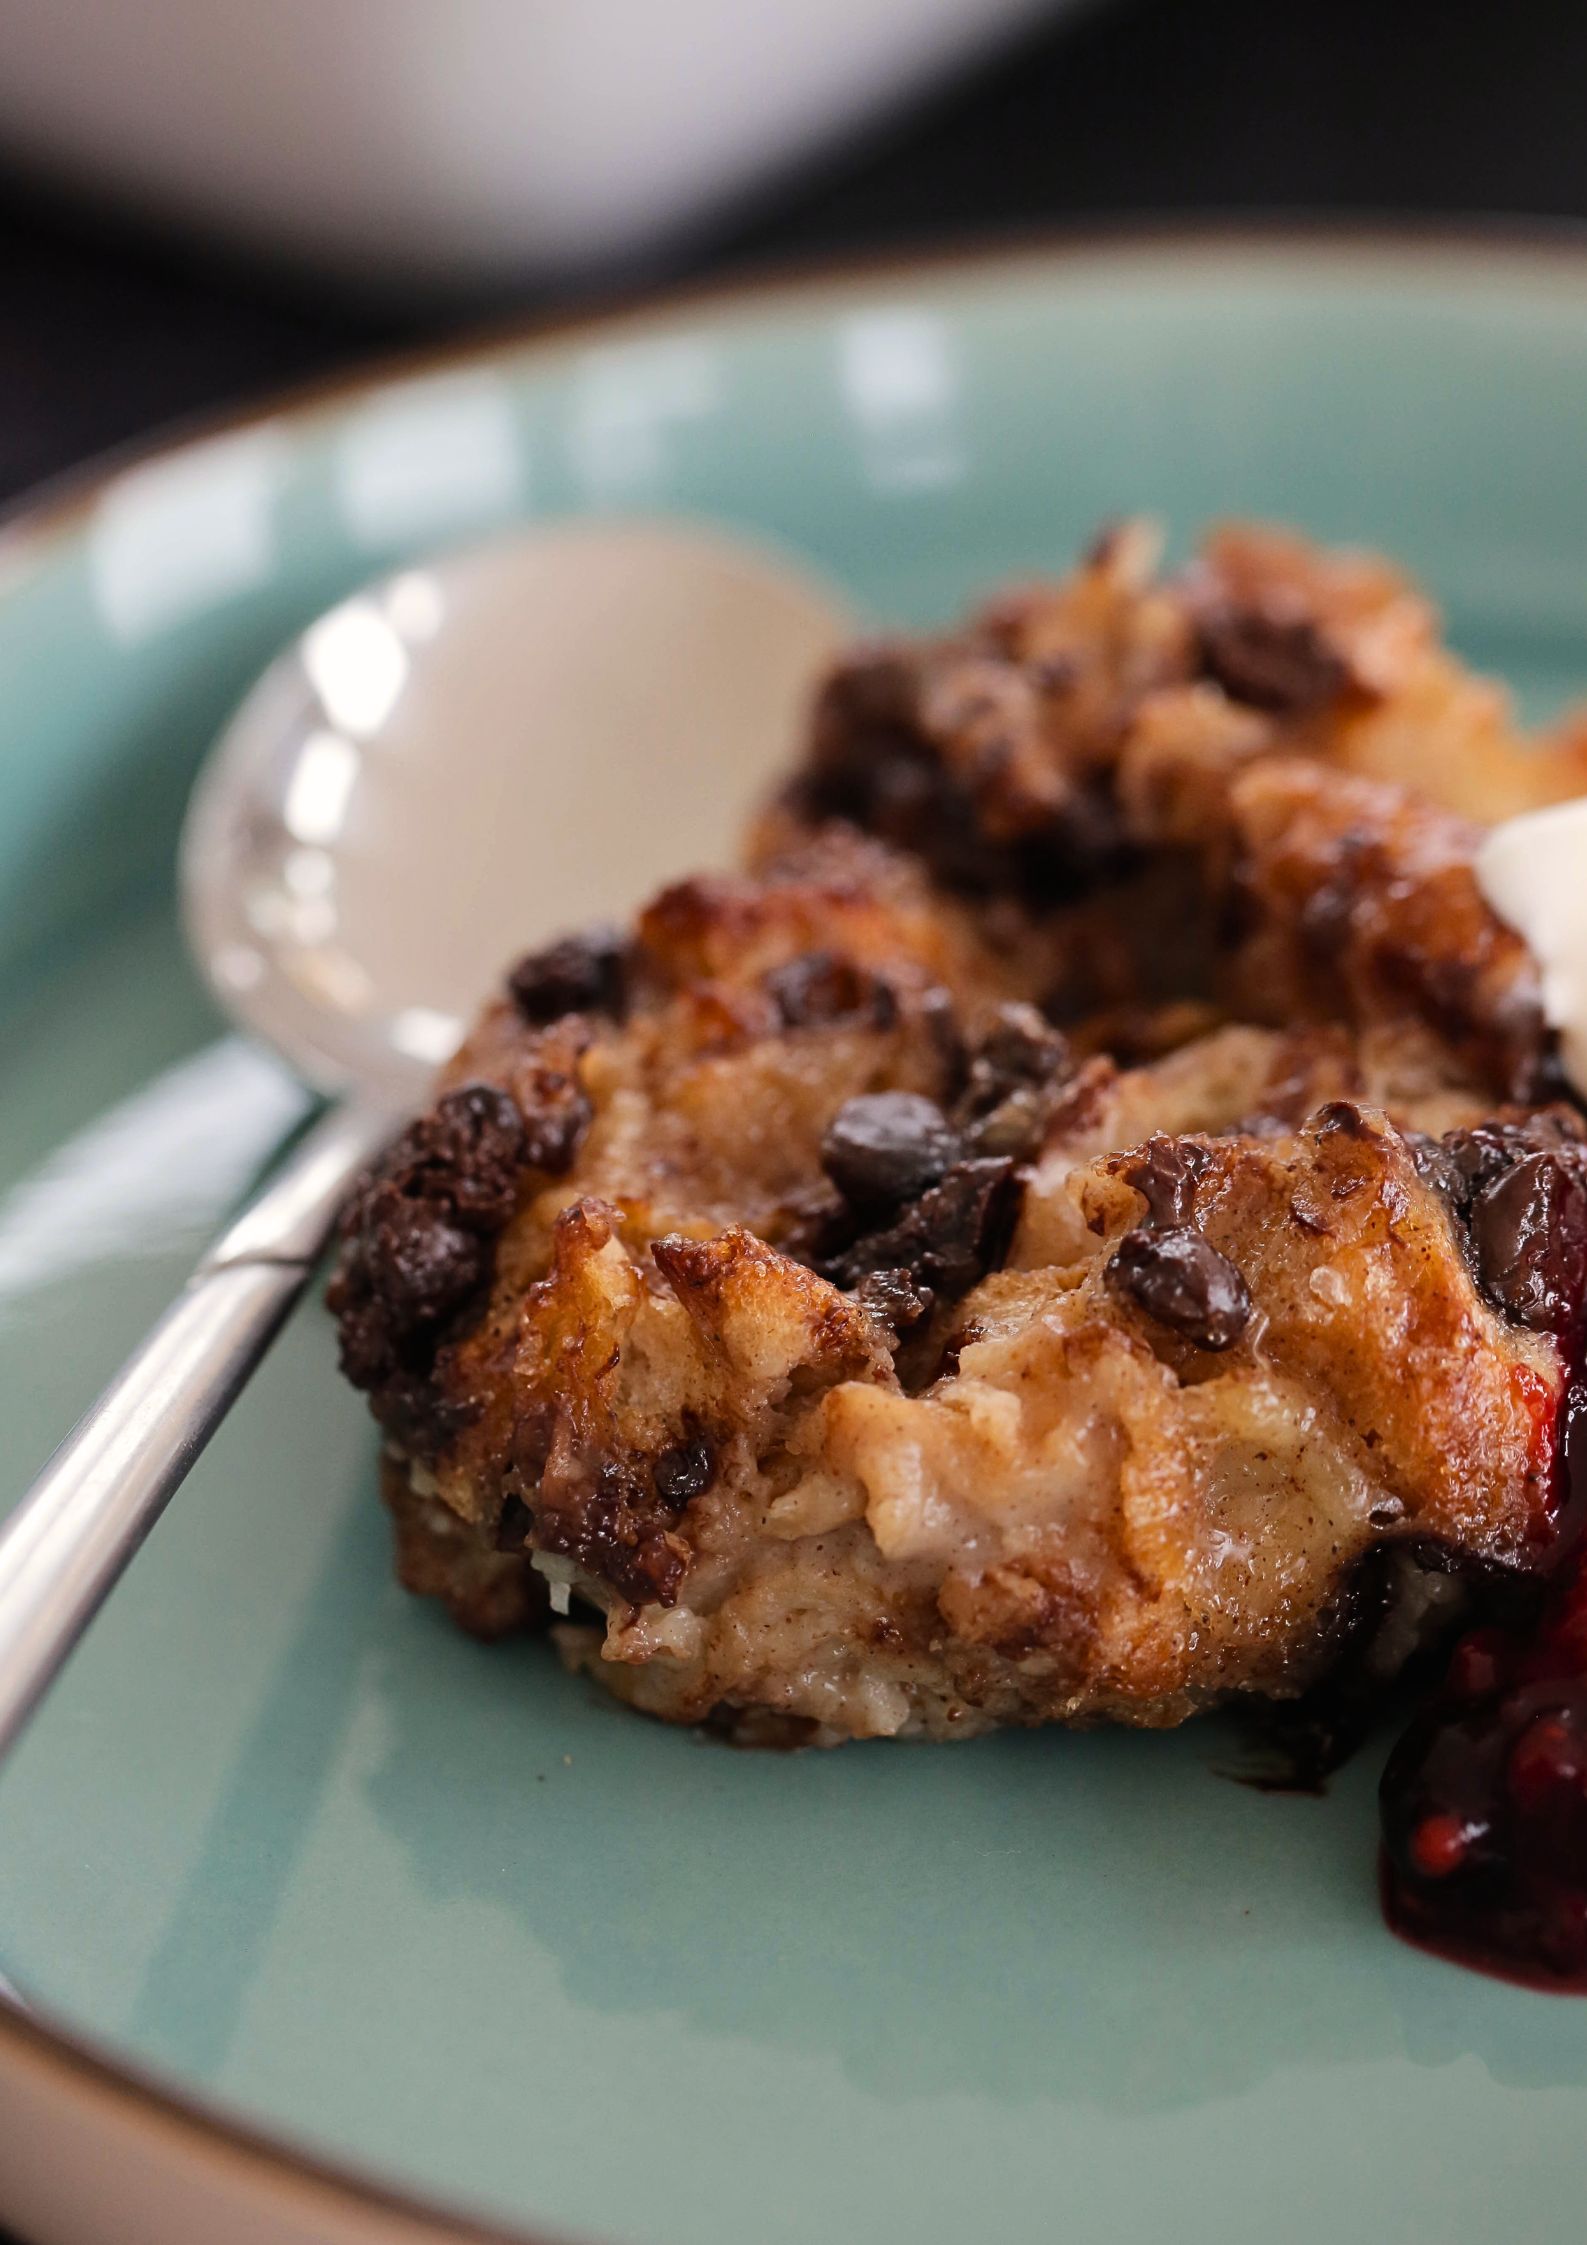 Homemade vegan croissant bread pudding is sweet, rich and custardy and studded with dark chocolate chips. Make ahead and serve with a warm berry compote and whipped cream for a special occasion dessert. Recipe on thecookandhim.com | #croissantbreadpudding #vegandessert #veganpudding #veganbaking